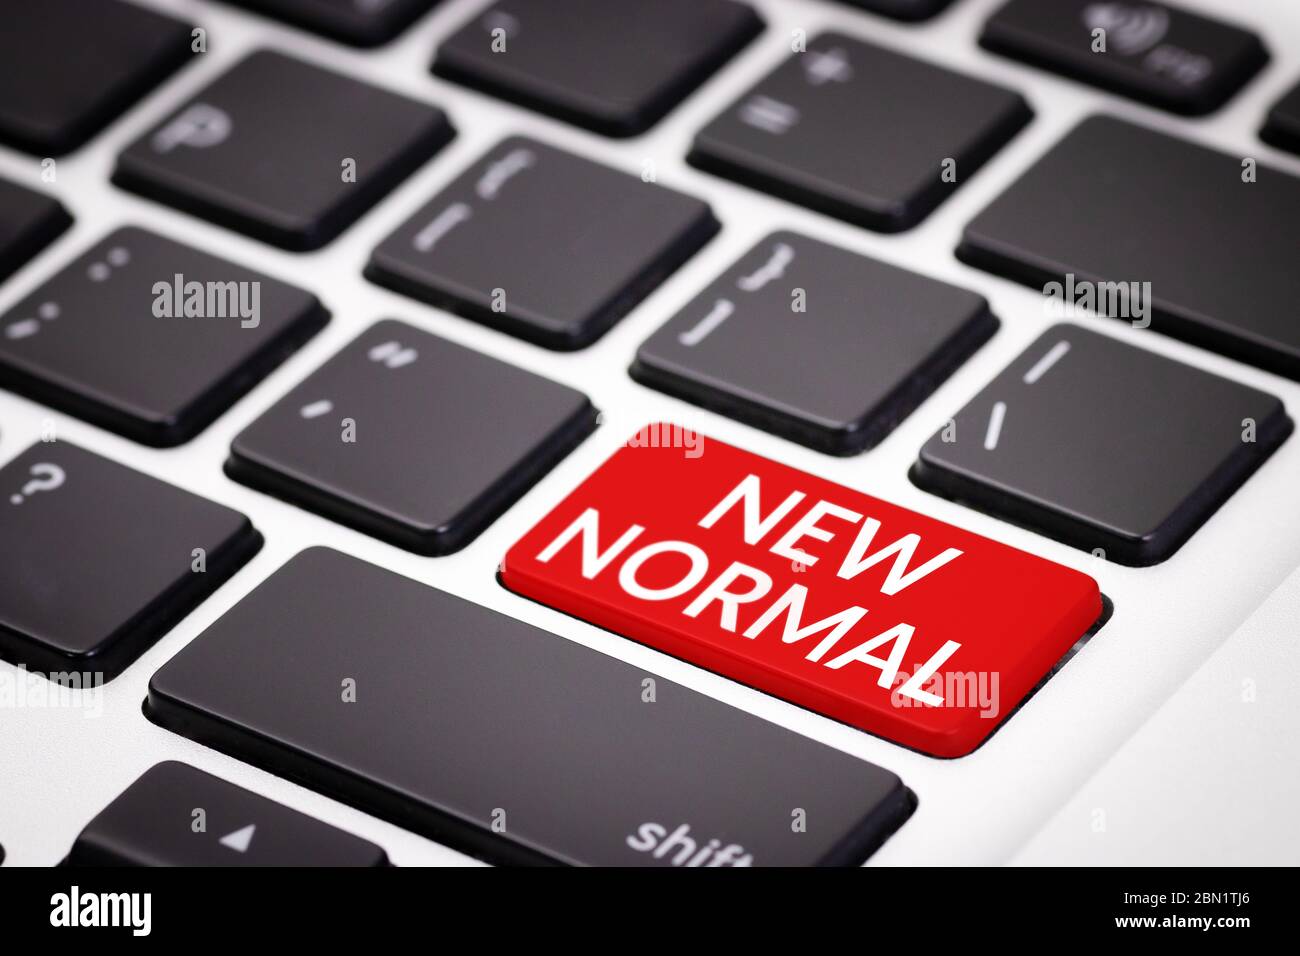 the new normal after COVID-19 Coronavirus pandemic concept. red keyboard with text new normal, awareness campaign on social media. Stock Photo